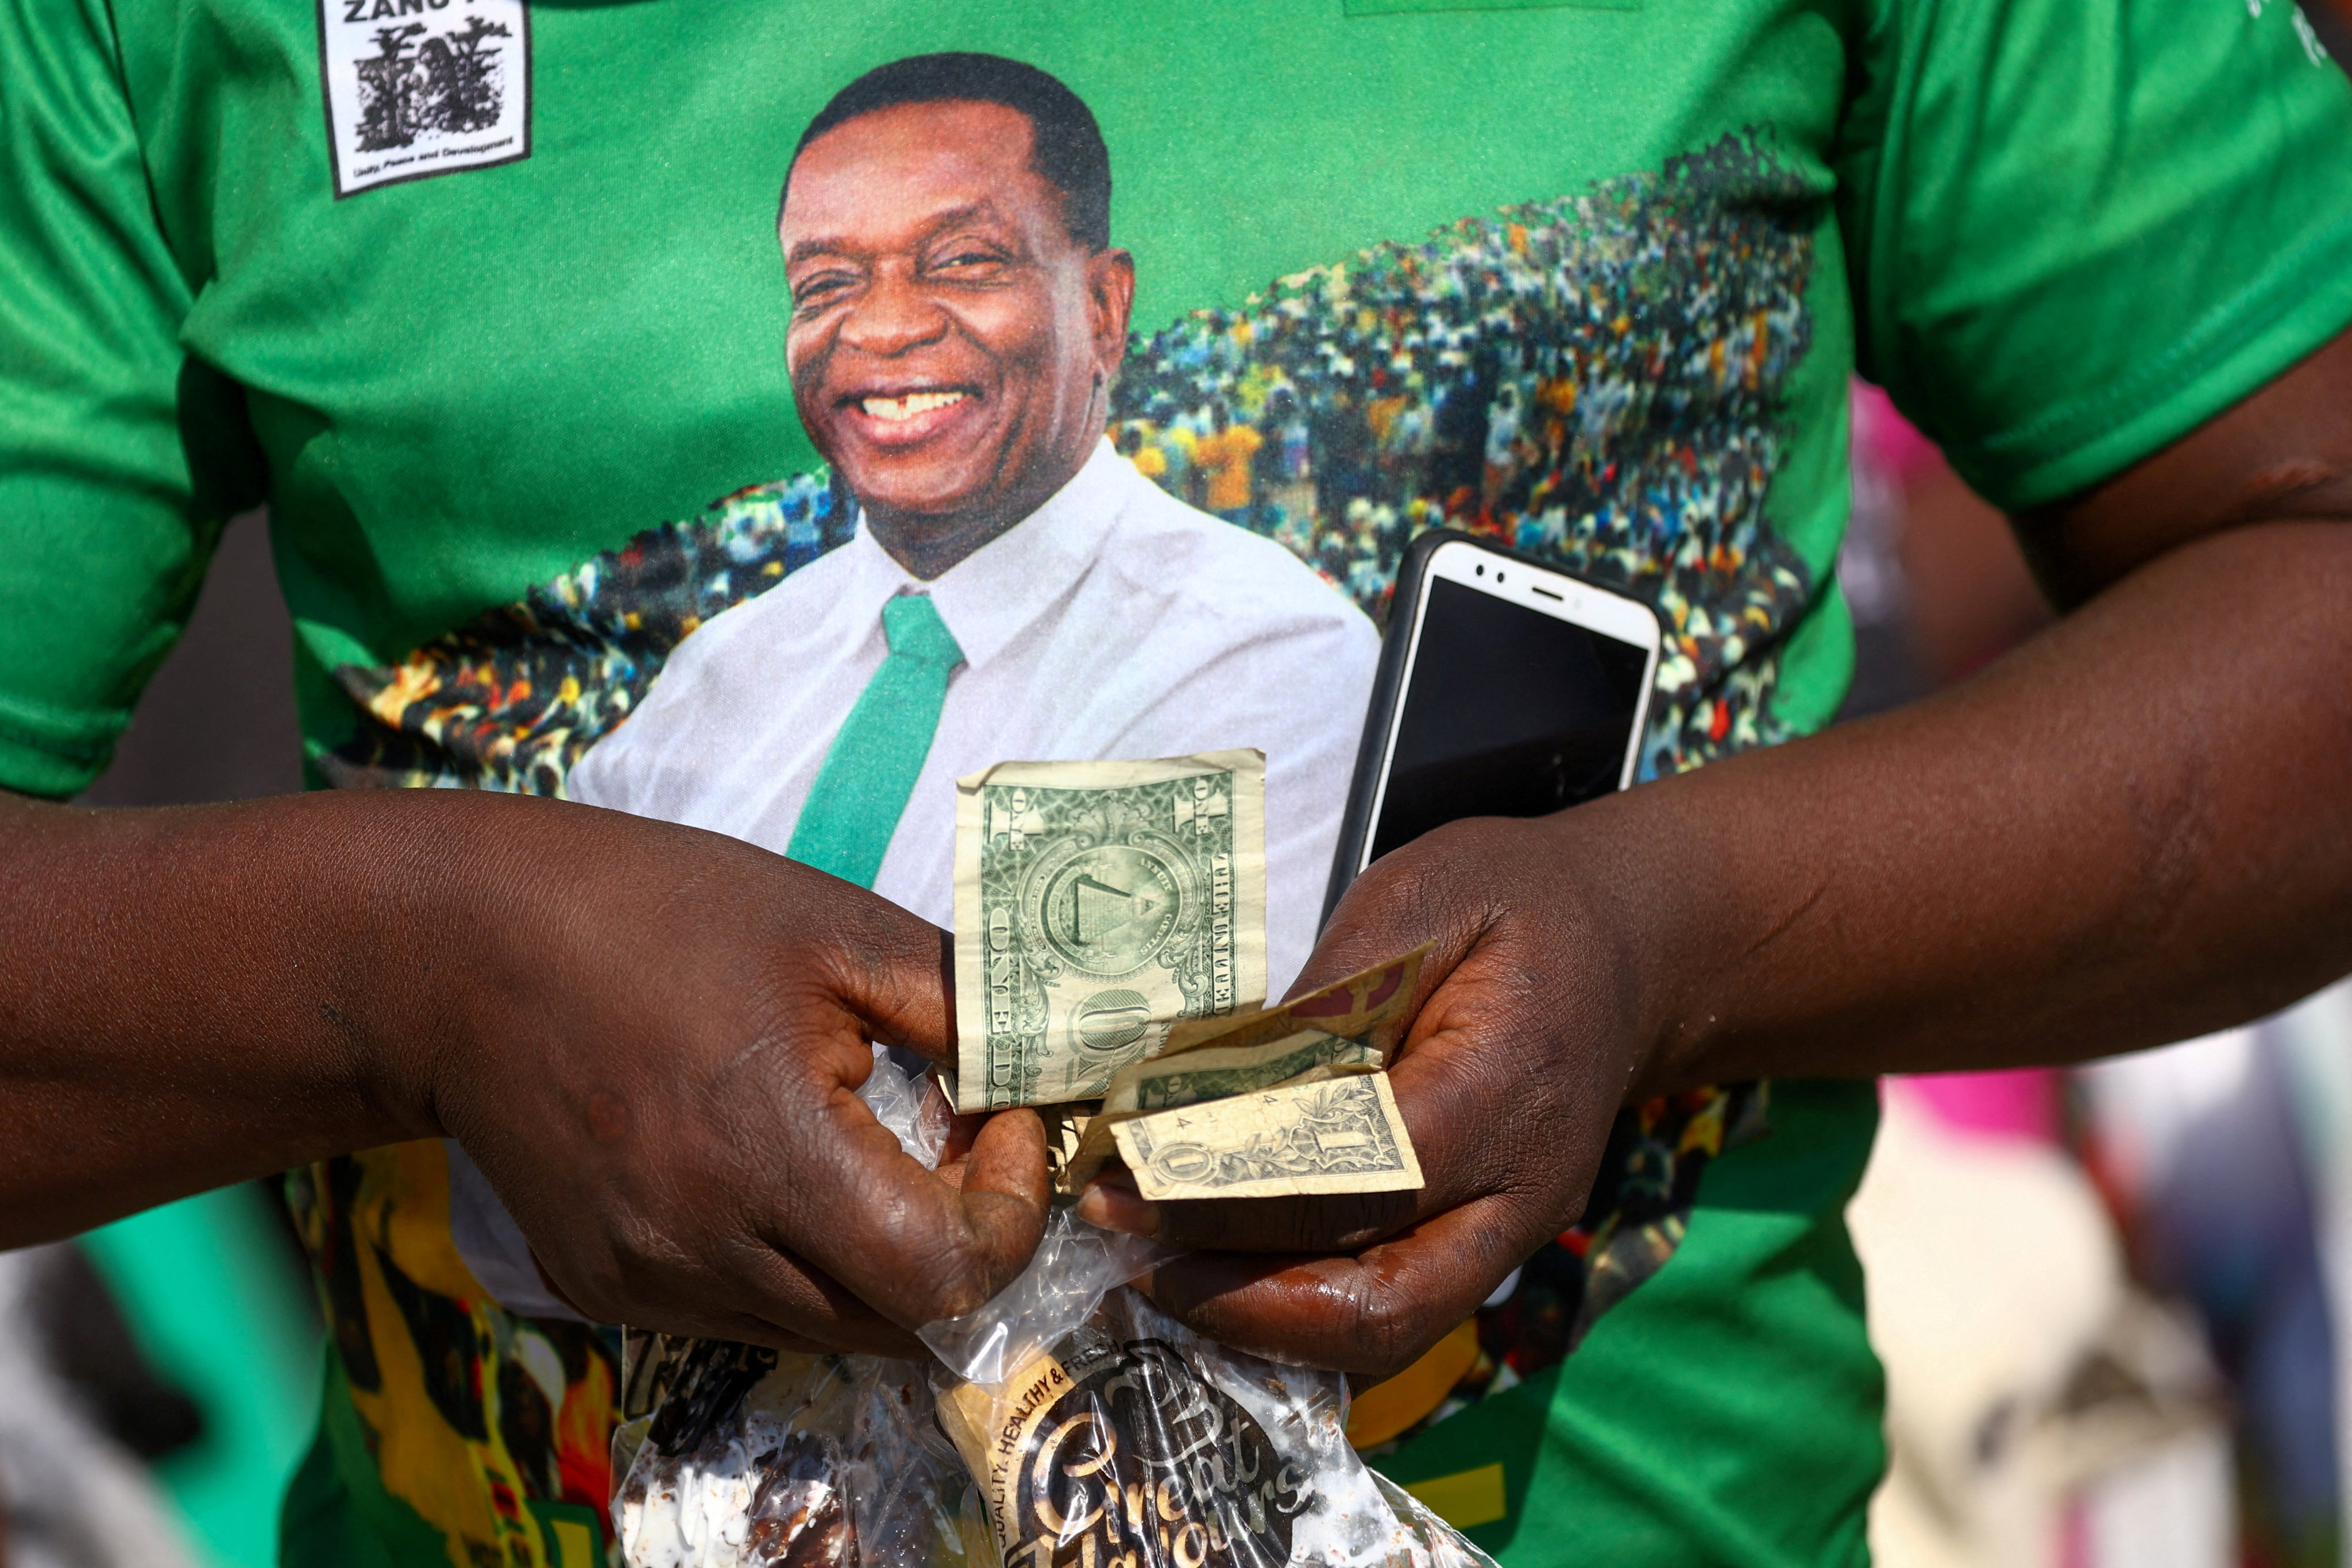 The face of President Emmerson Mnangagwa is pictured on a man’s shirt. Mnangagwa  is seeking a second term. Photo: Reuters